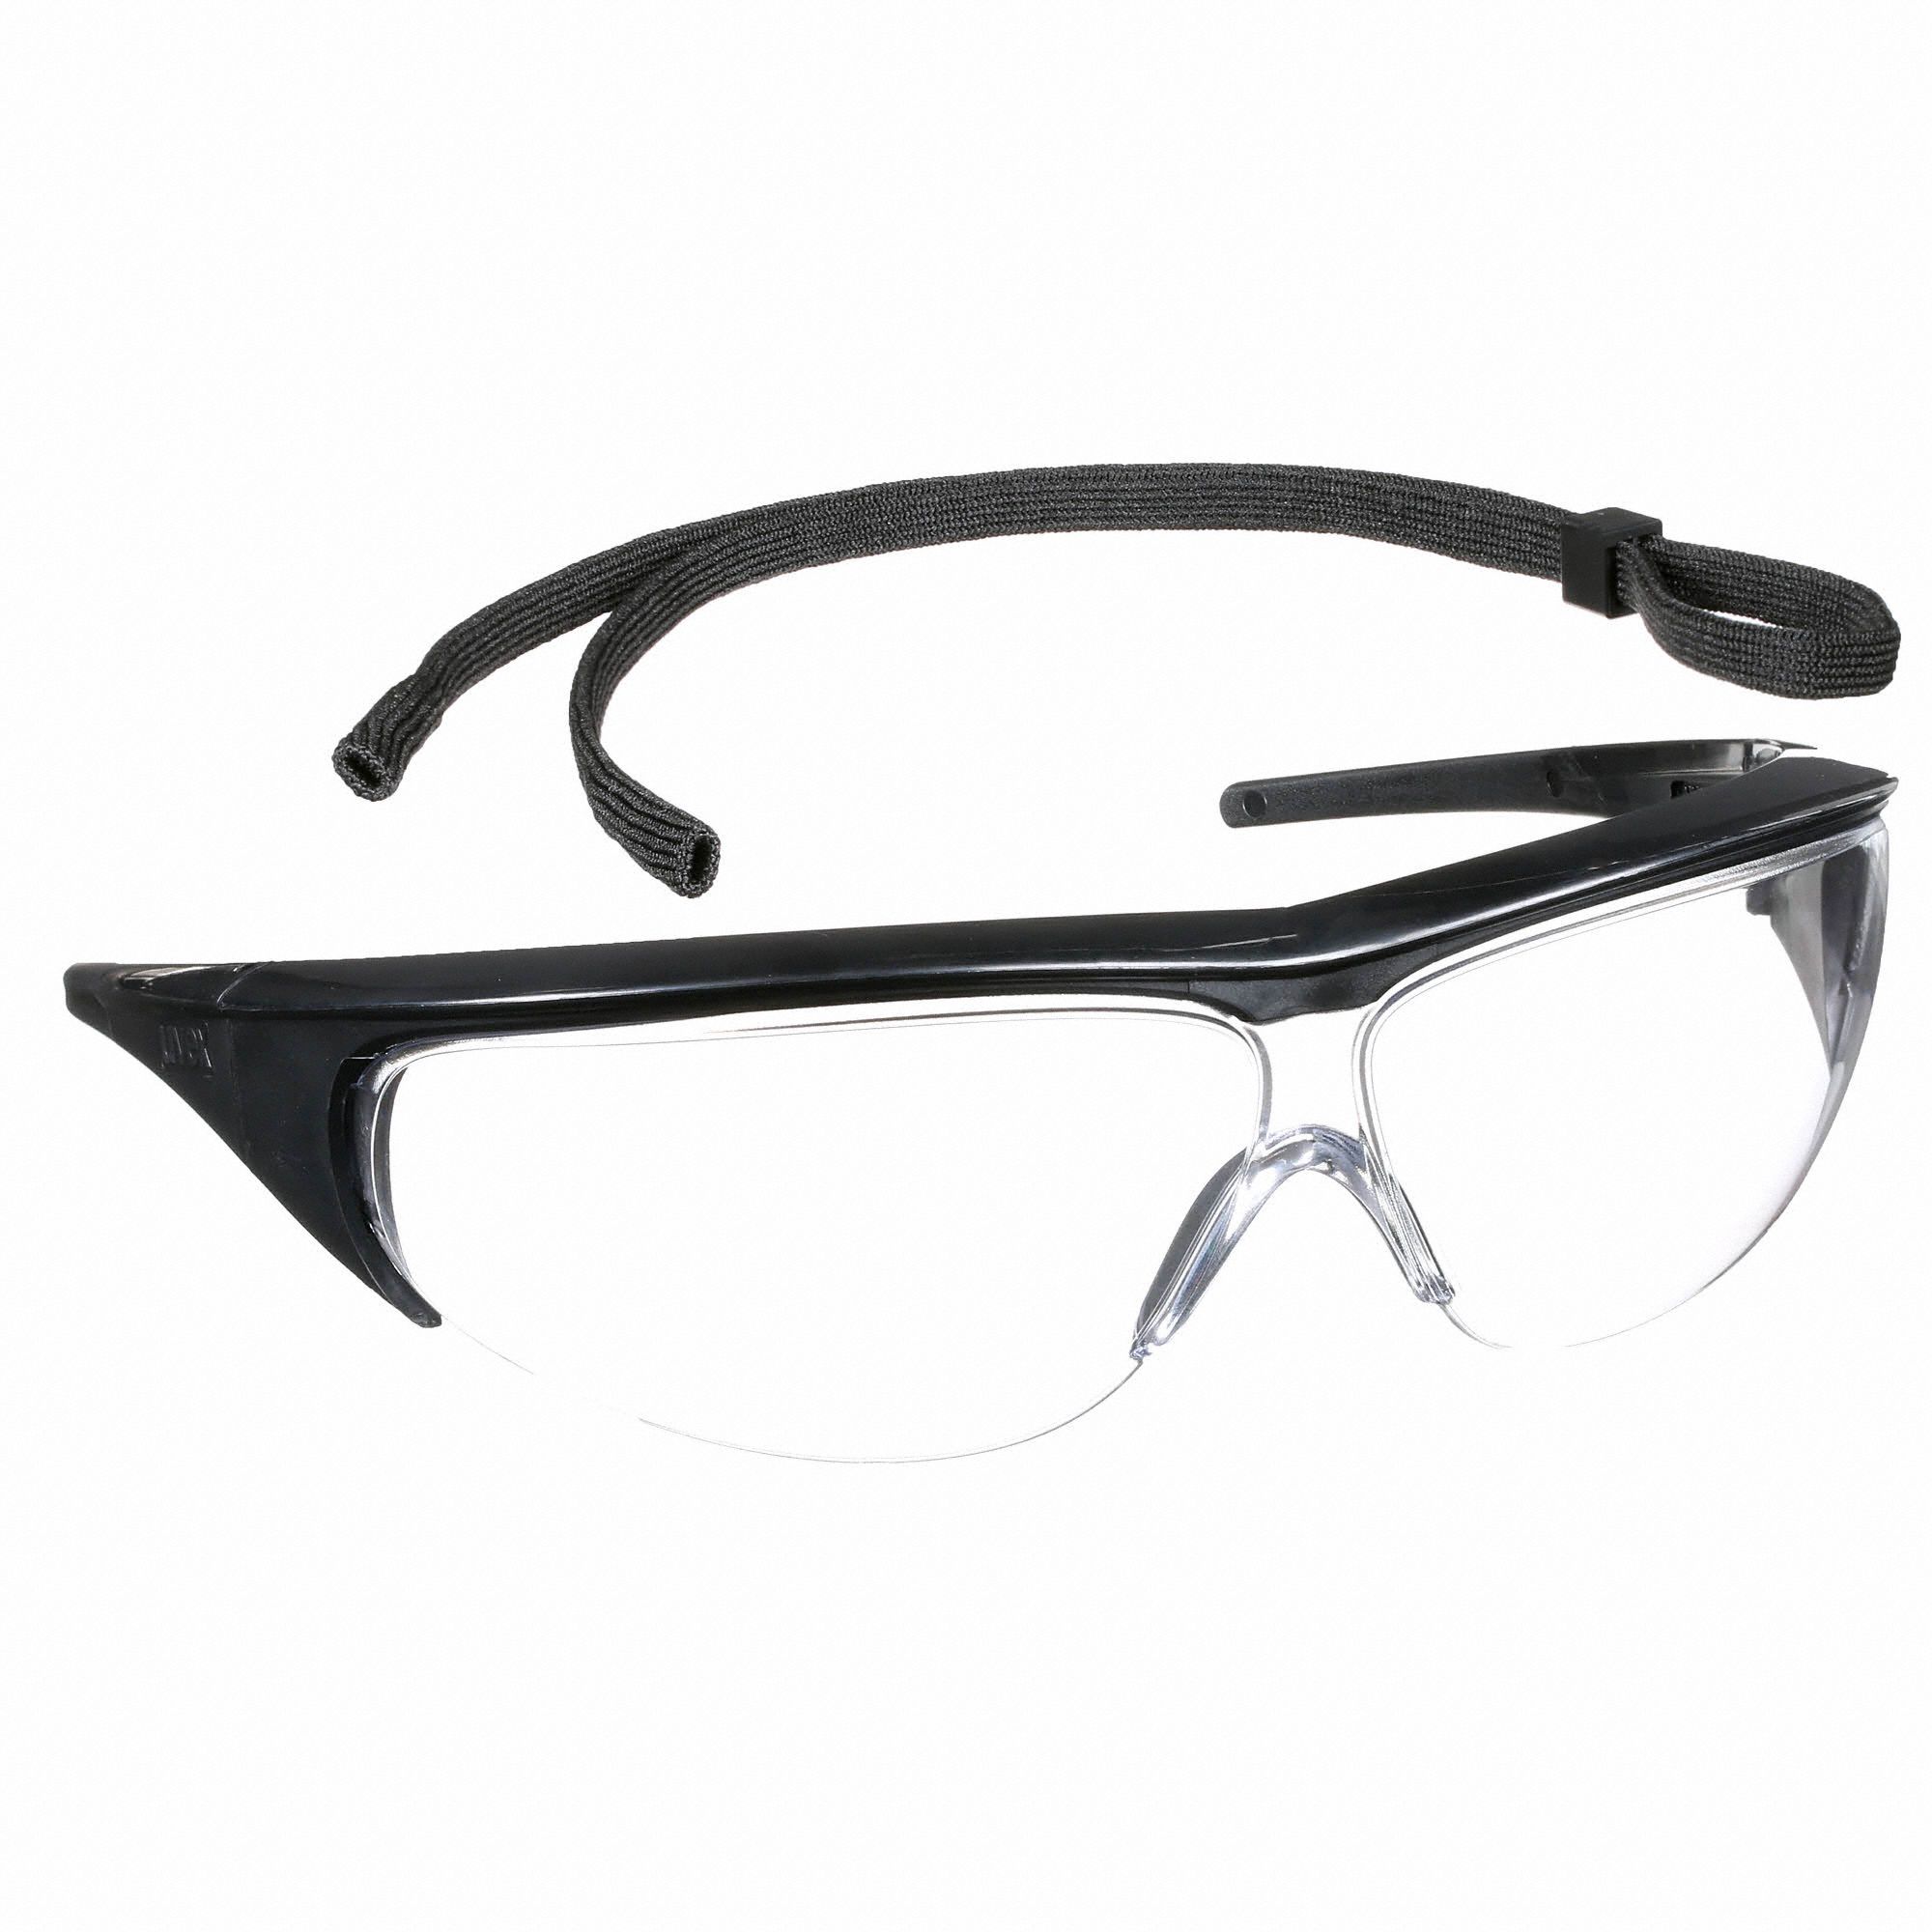 Honeywell Uvex Millennia® Scratch Resistant Safety Glasses Clear Lens Color 4yh38 11150350